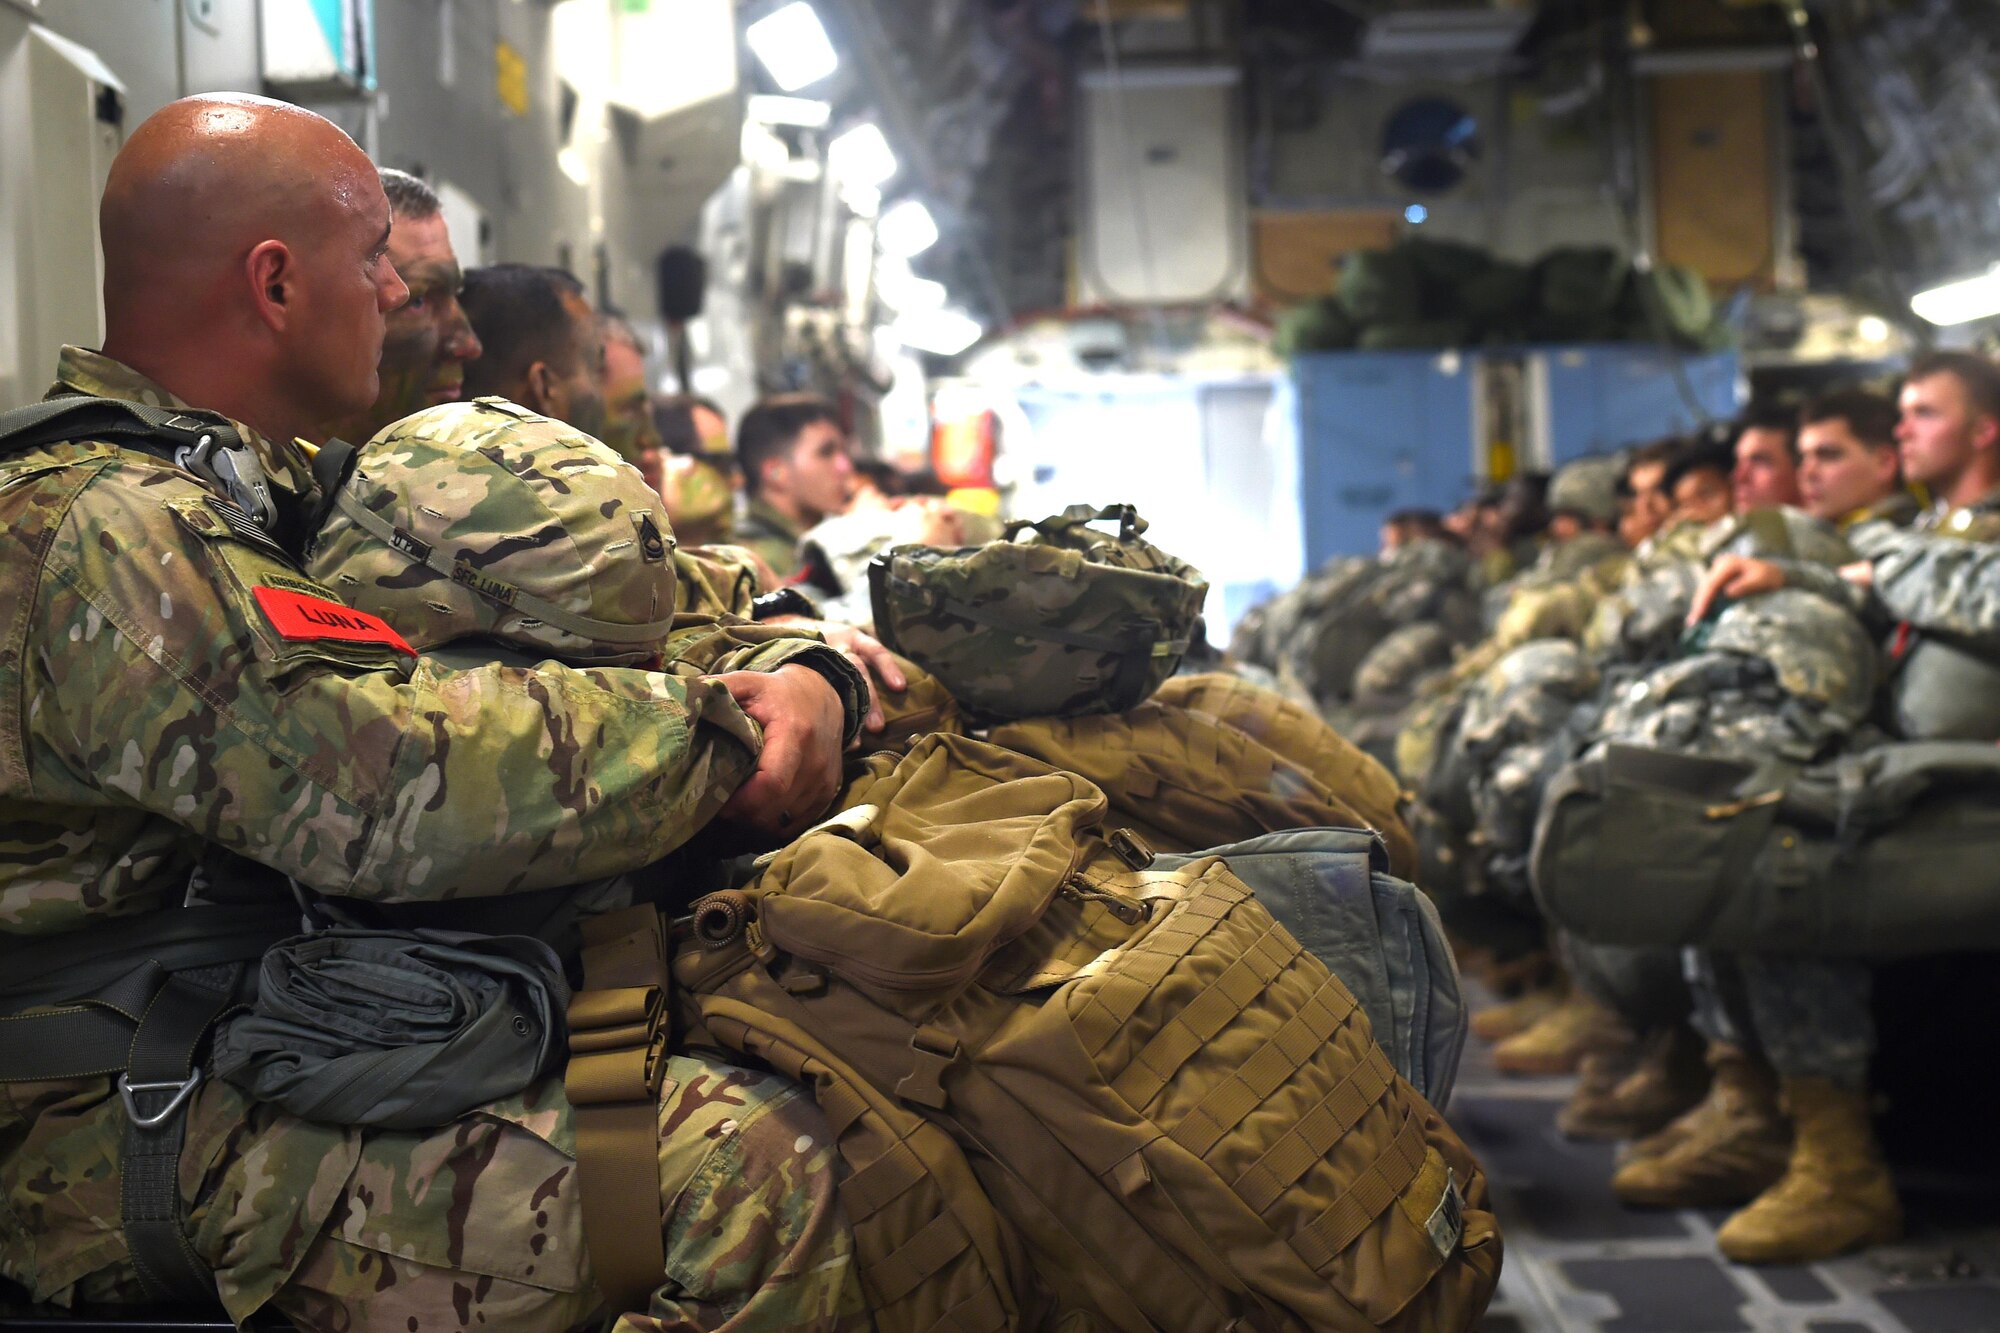 82nd Airborne Soldiers prepare to jump out of a C-17 Globemaster III at Pope Army Air Field, North Carolina, June 4, 2016. Seven C-17’s loaded approximately 90 Soldiers to conduct a personnel air drop over the range for training prior to departing for a large scale exercise in Europe. (U.S. Air Force photo/Staff Sgt. Naomi Shipley)